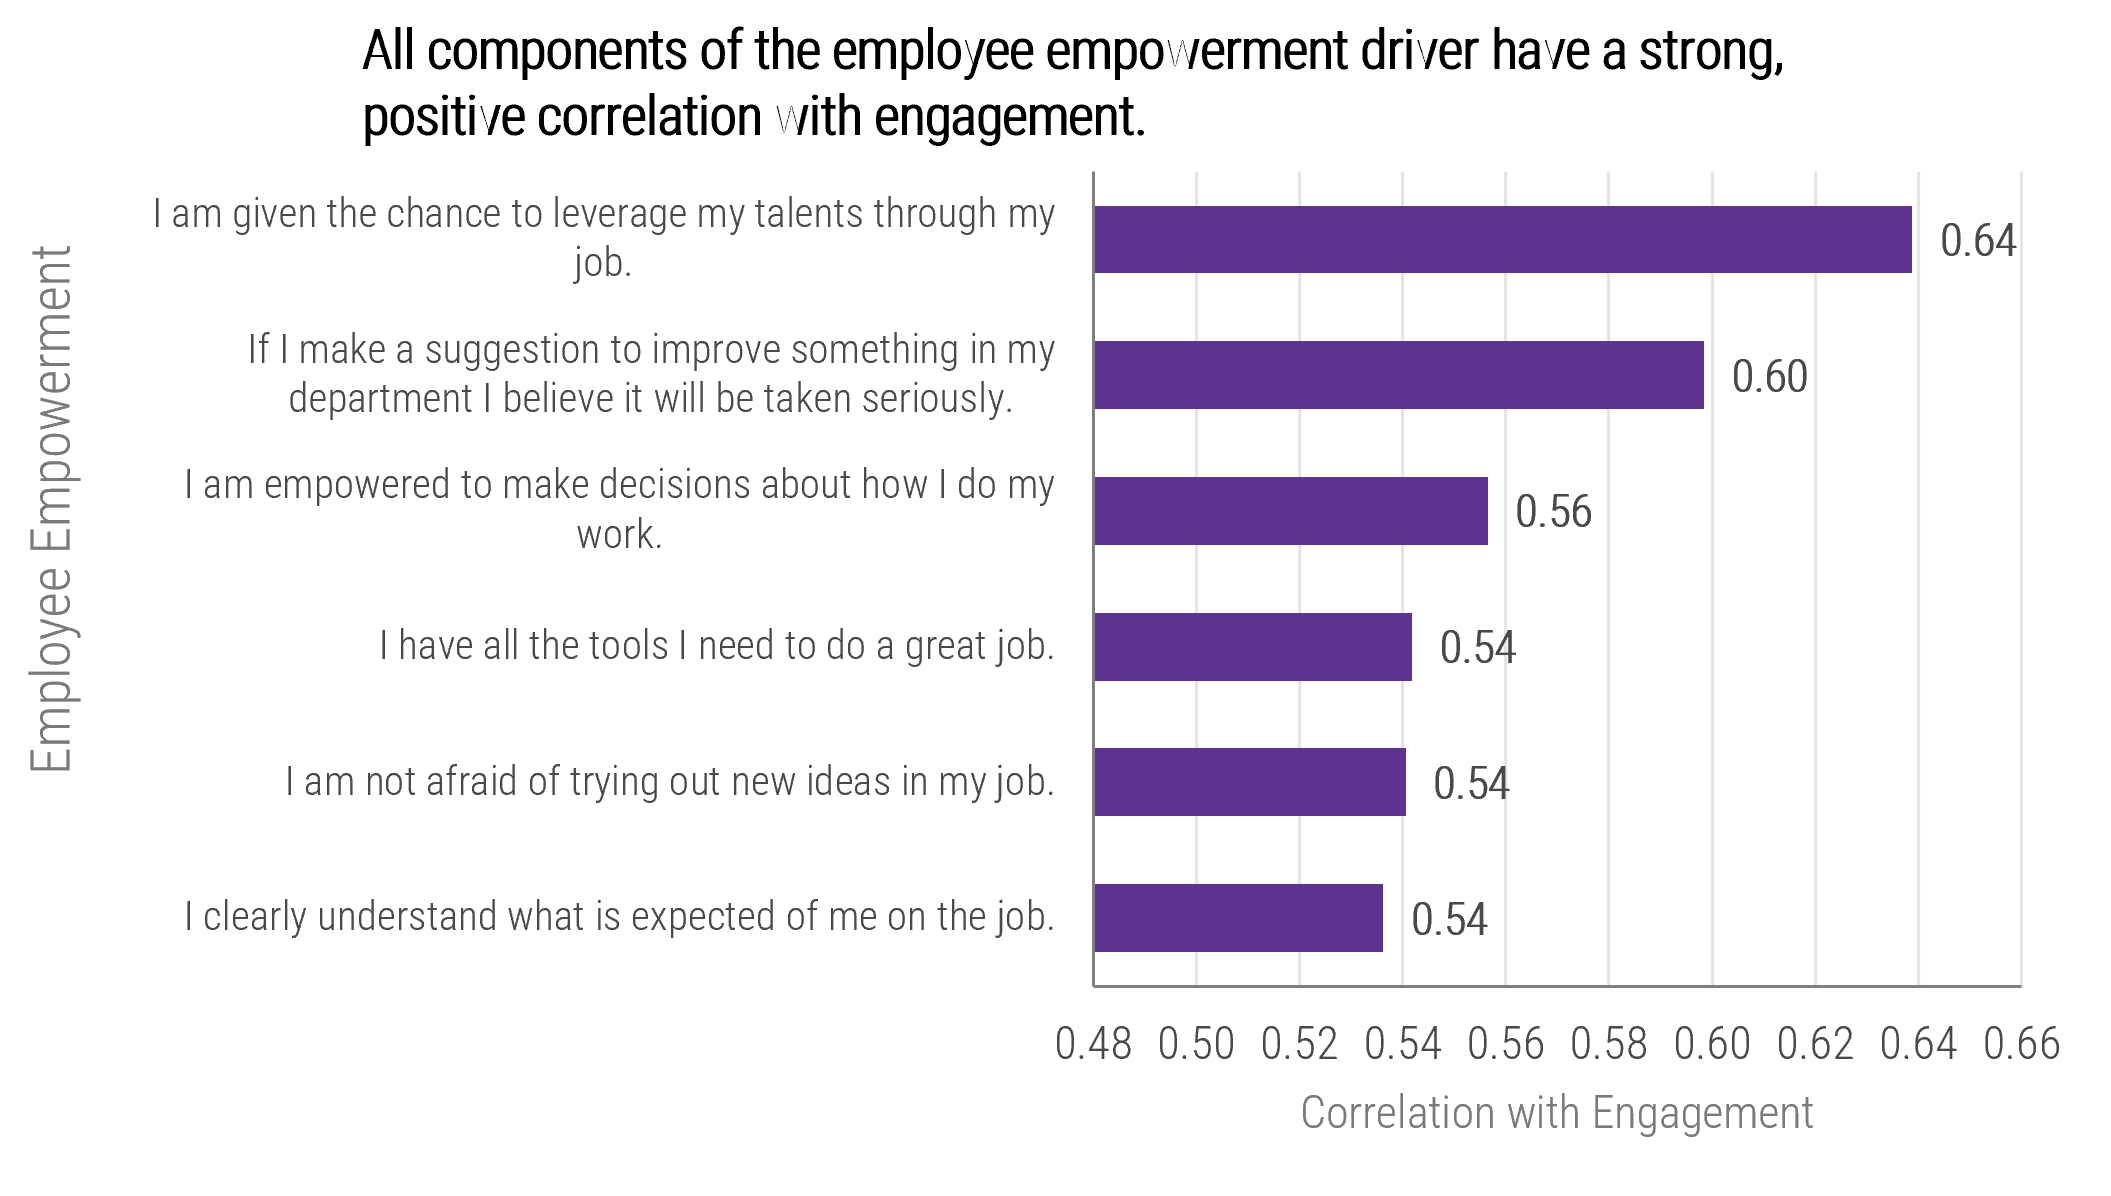 The image contains a screenshot to demonstrate how accountability increases employee empowerment.